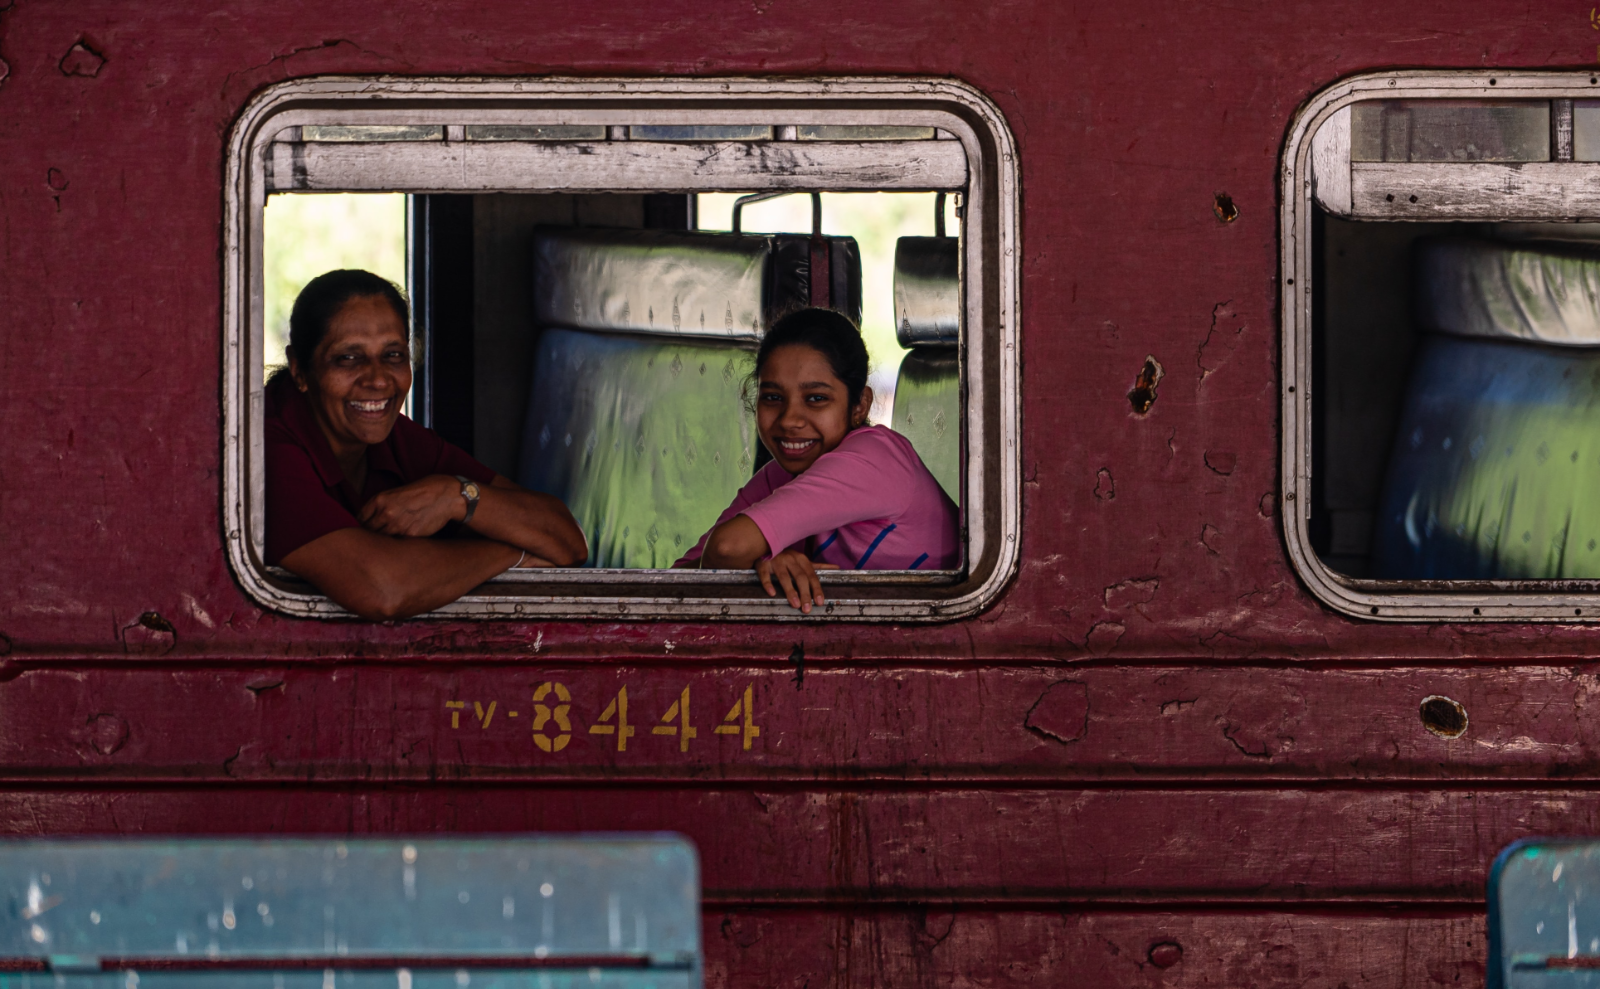 two women sitting in a train and smiling out the window at the camera